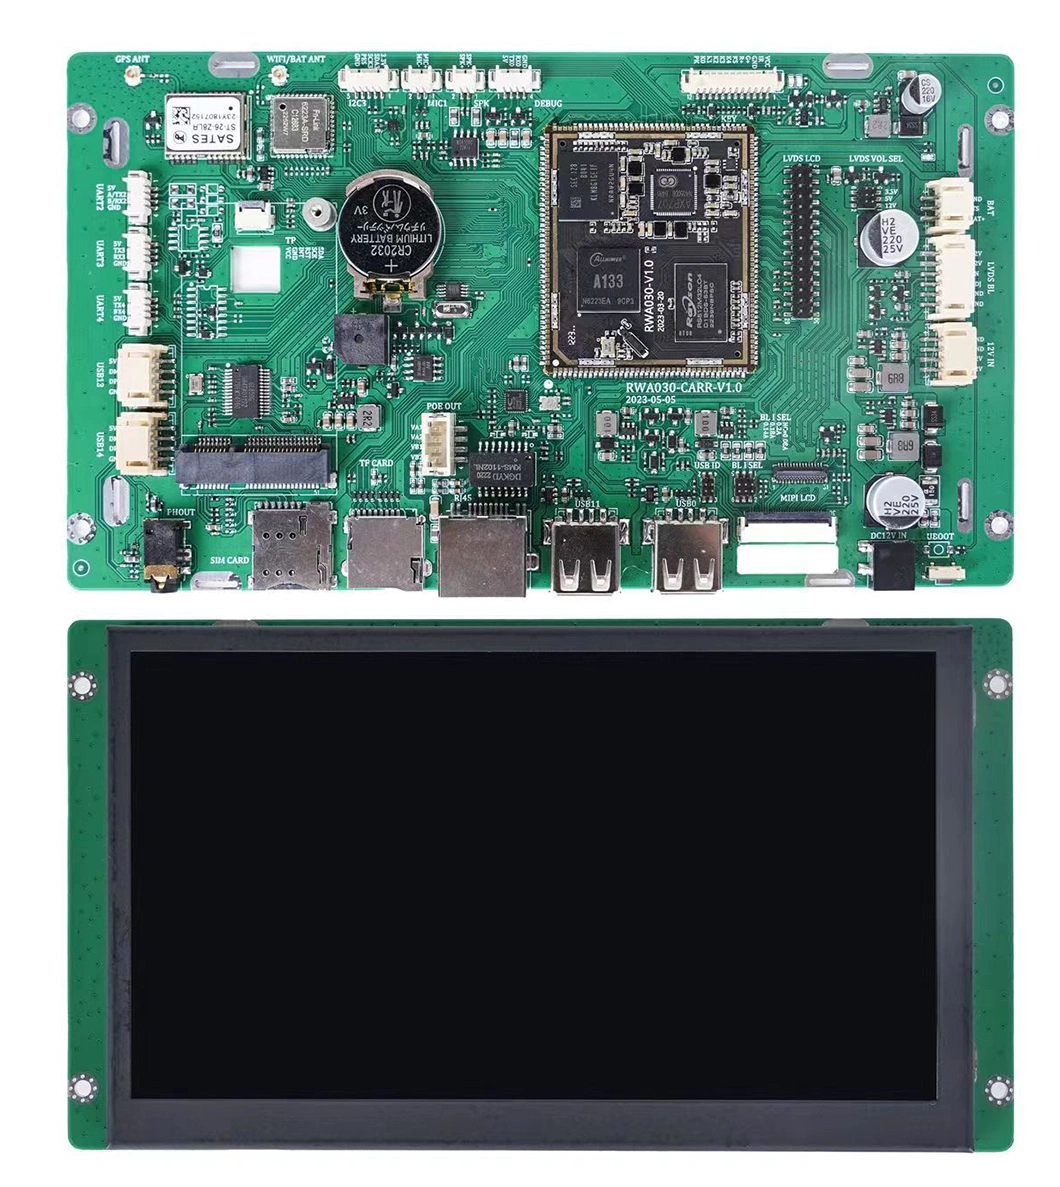 7 Inch Quad-Core Cortex-A53 Architecture Processor 1.5GHz A133 Motherboard Touch Panel for Industrial Control Equipment